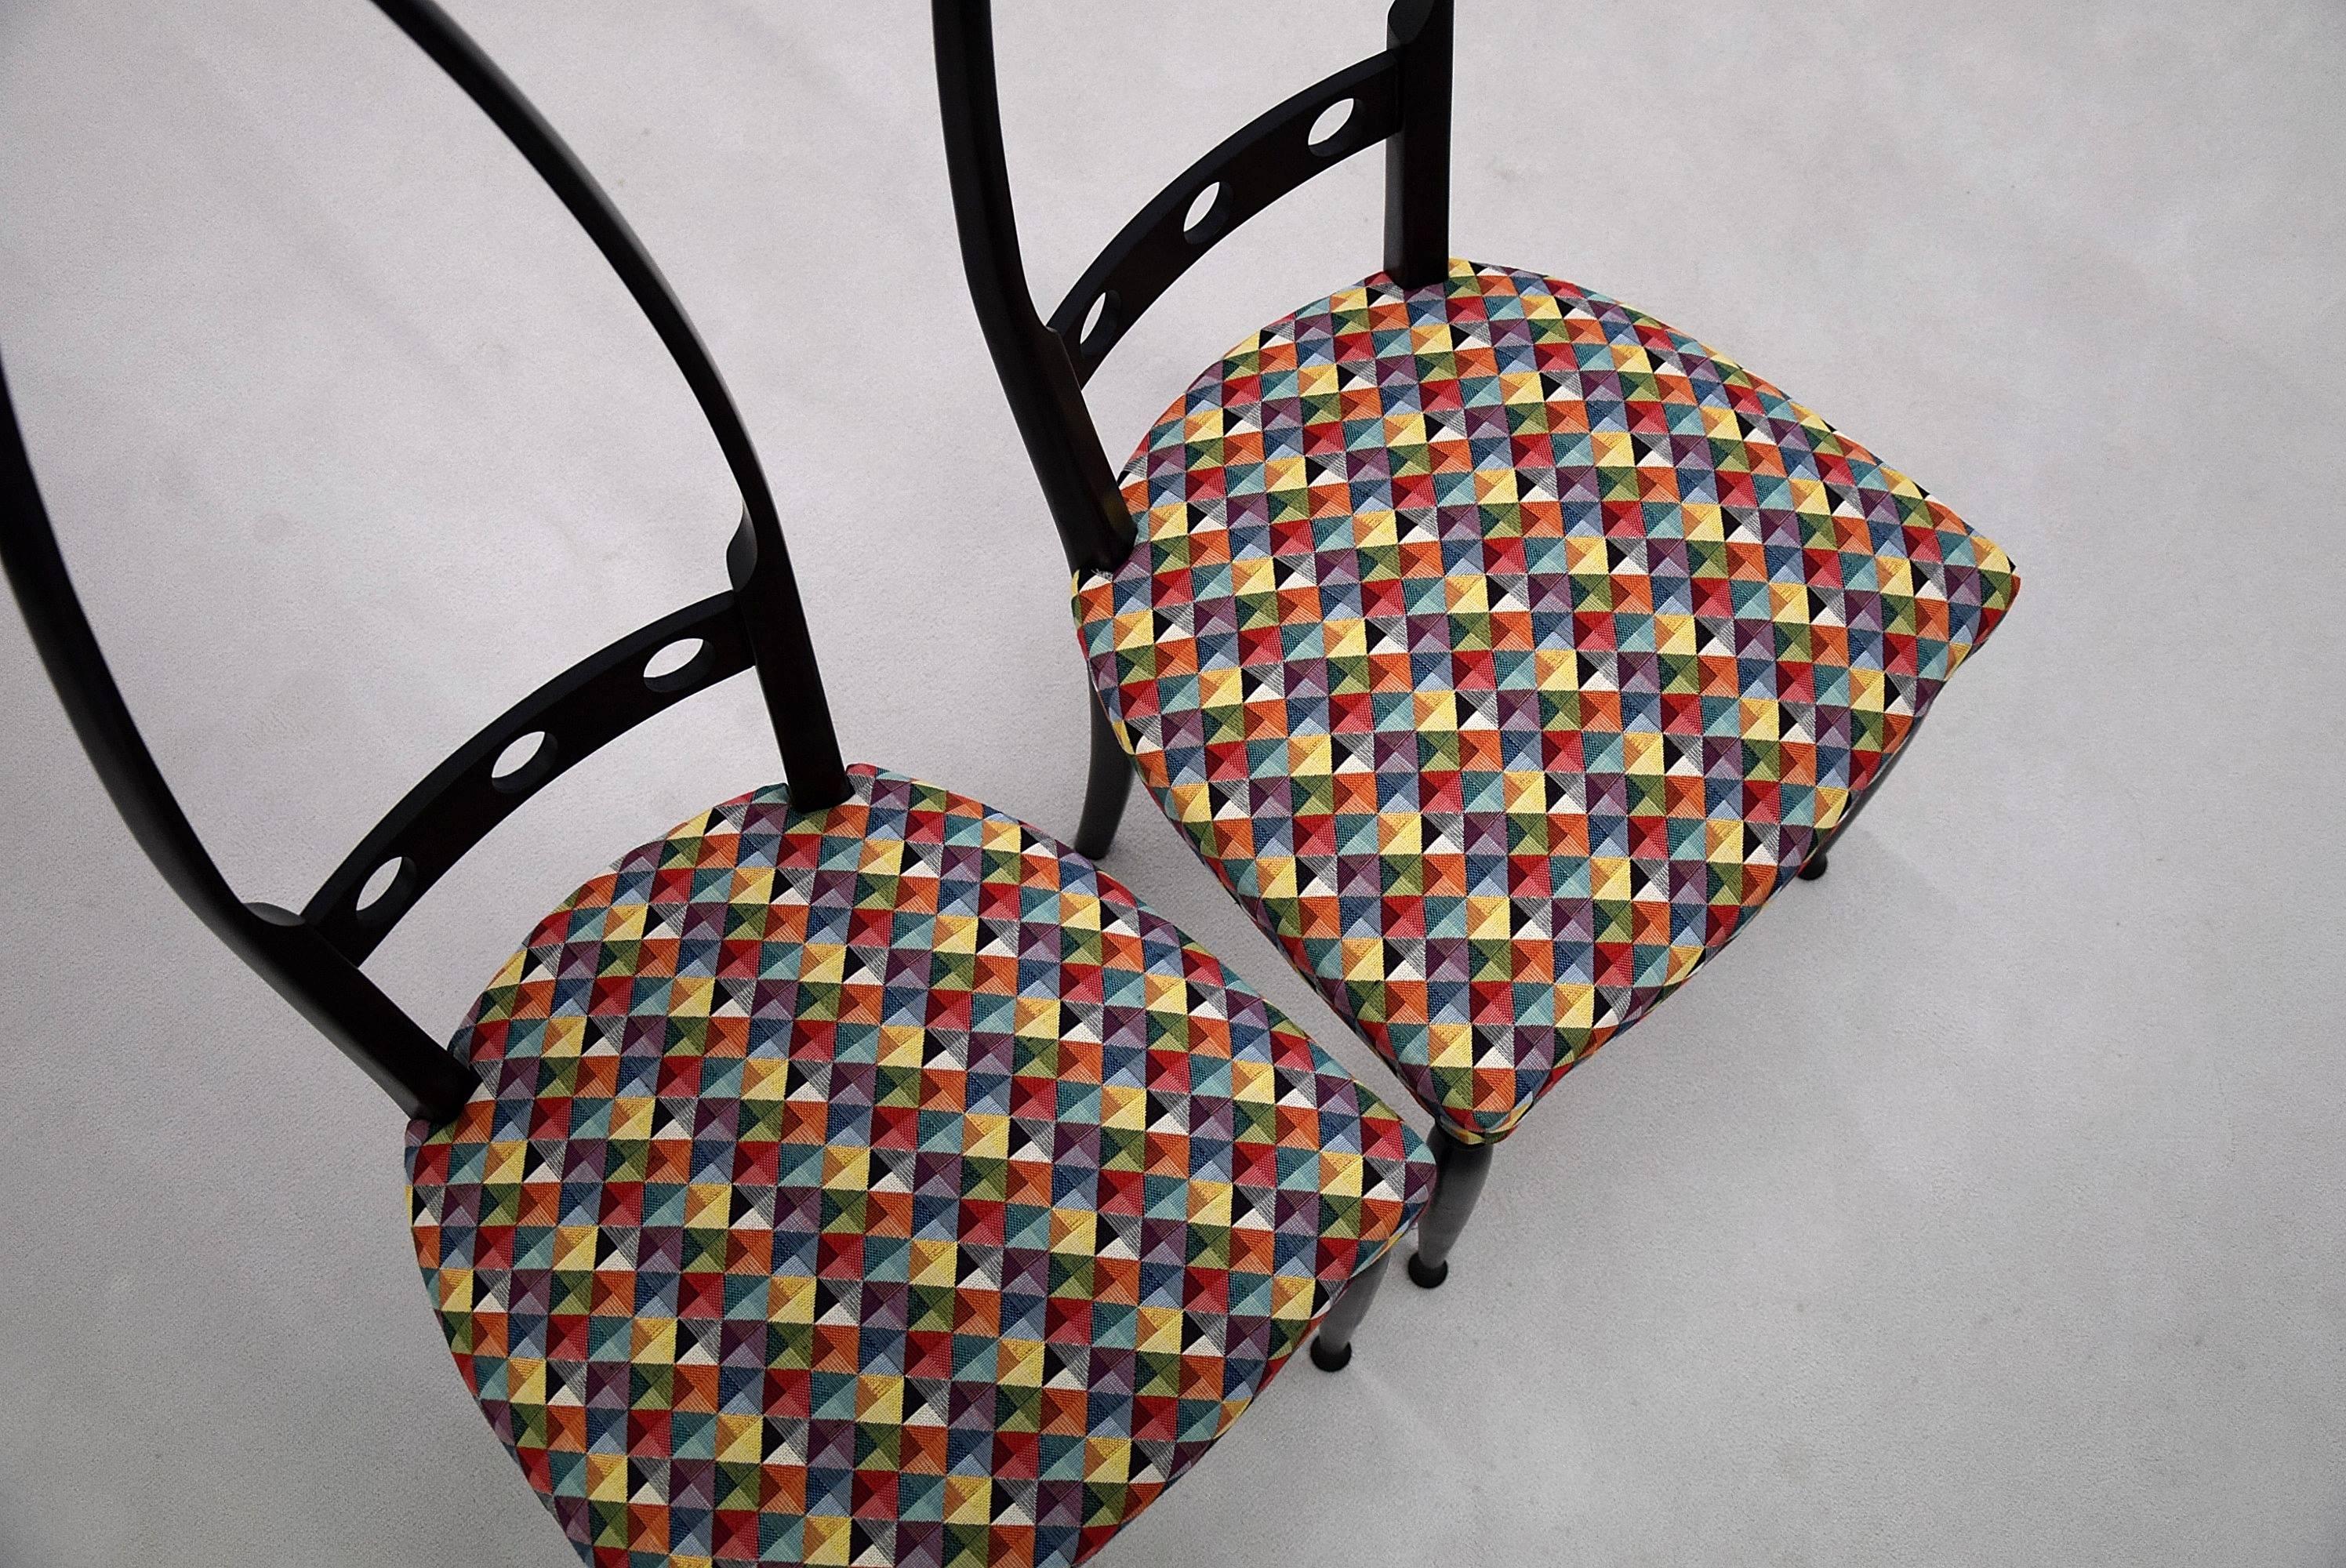 Pozzi and Verga mid century modern chairs.
Beautiful sculptural black lacquered Mid-Century chairs by Pozzi e Verga, Italy.
The chairs are in great condition and have been reupholstered in Italy by a true Artigiano with Missoni fabric which recalls